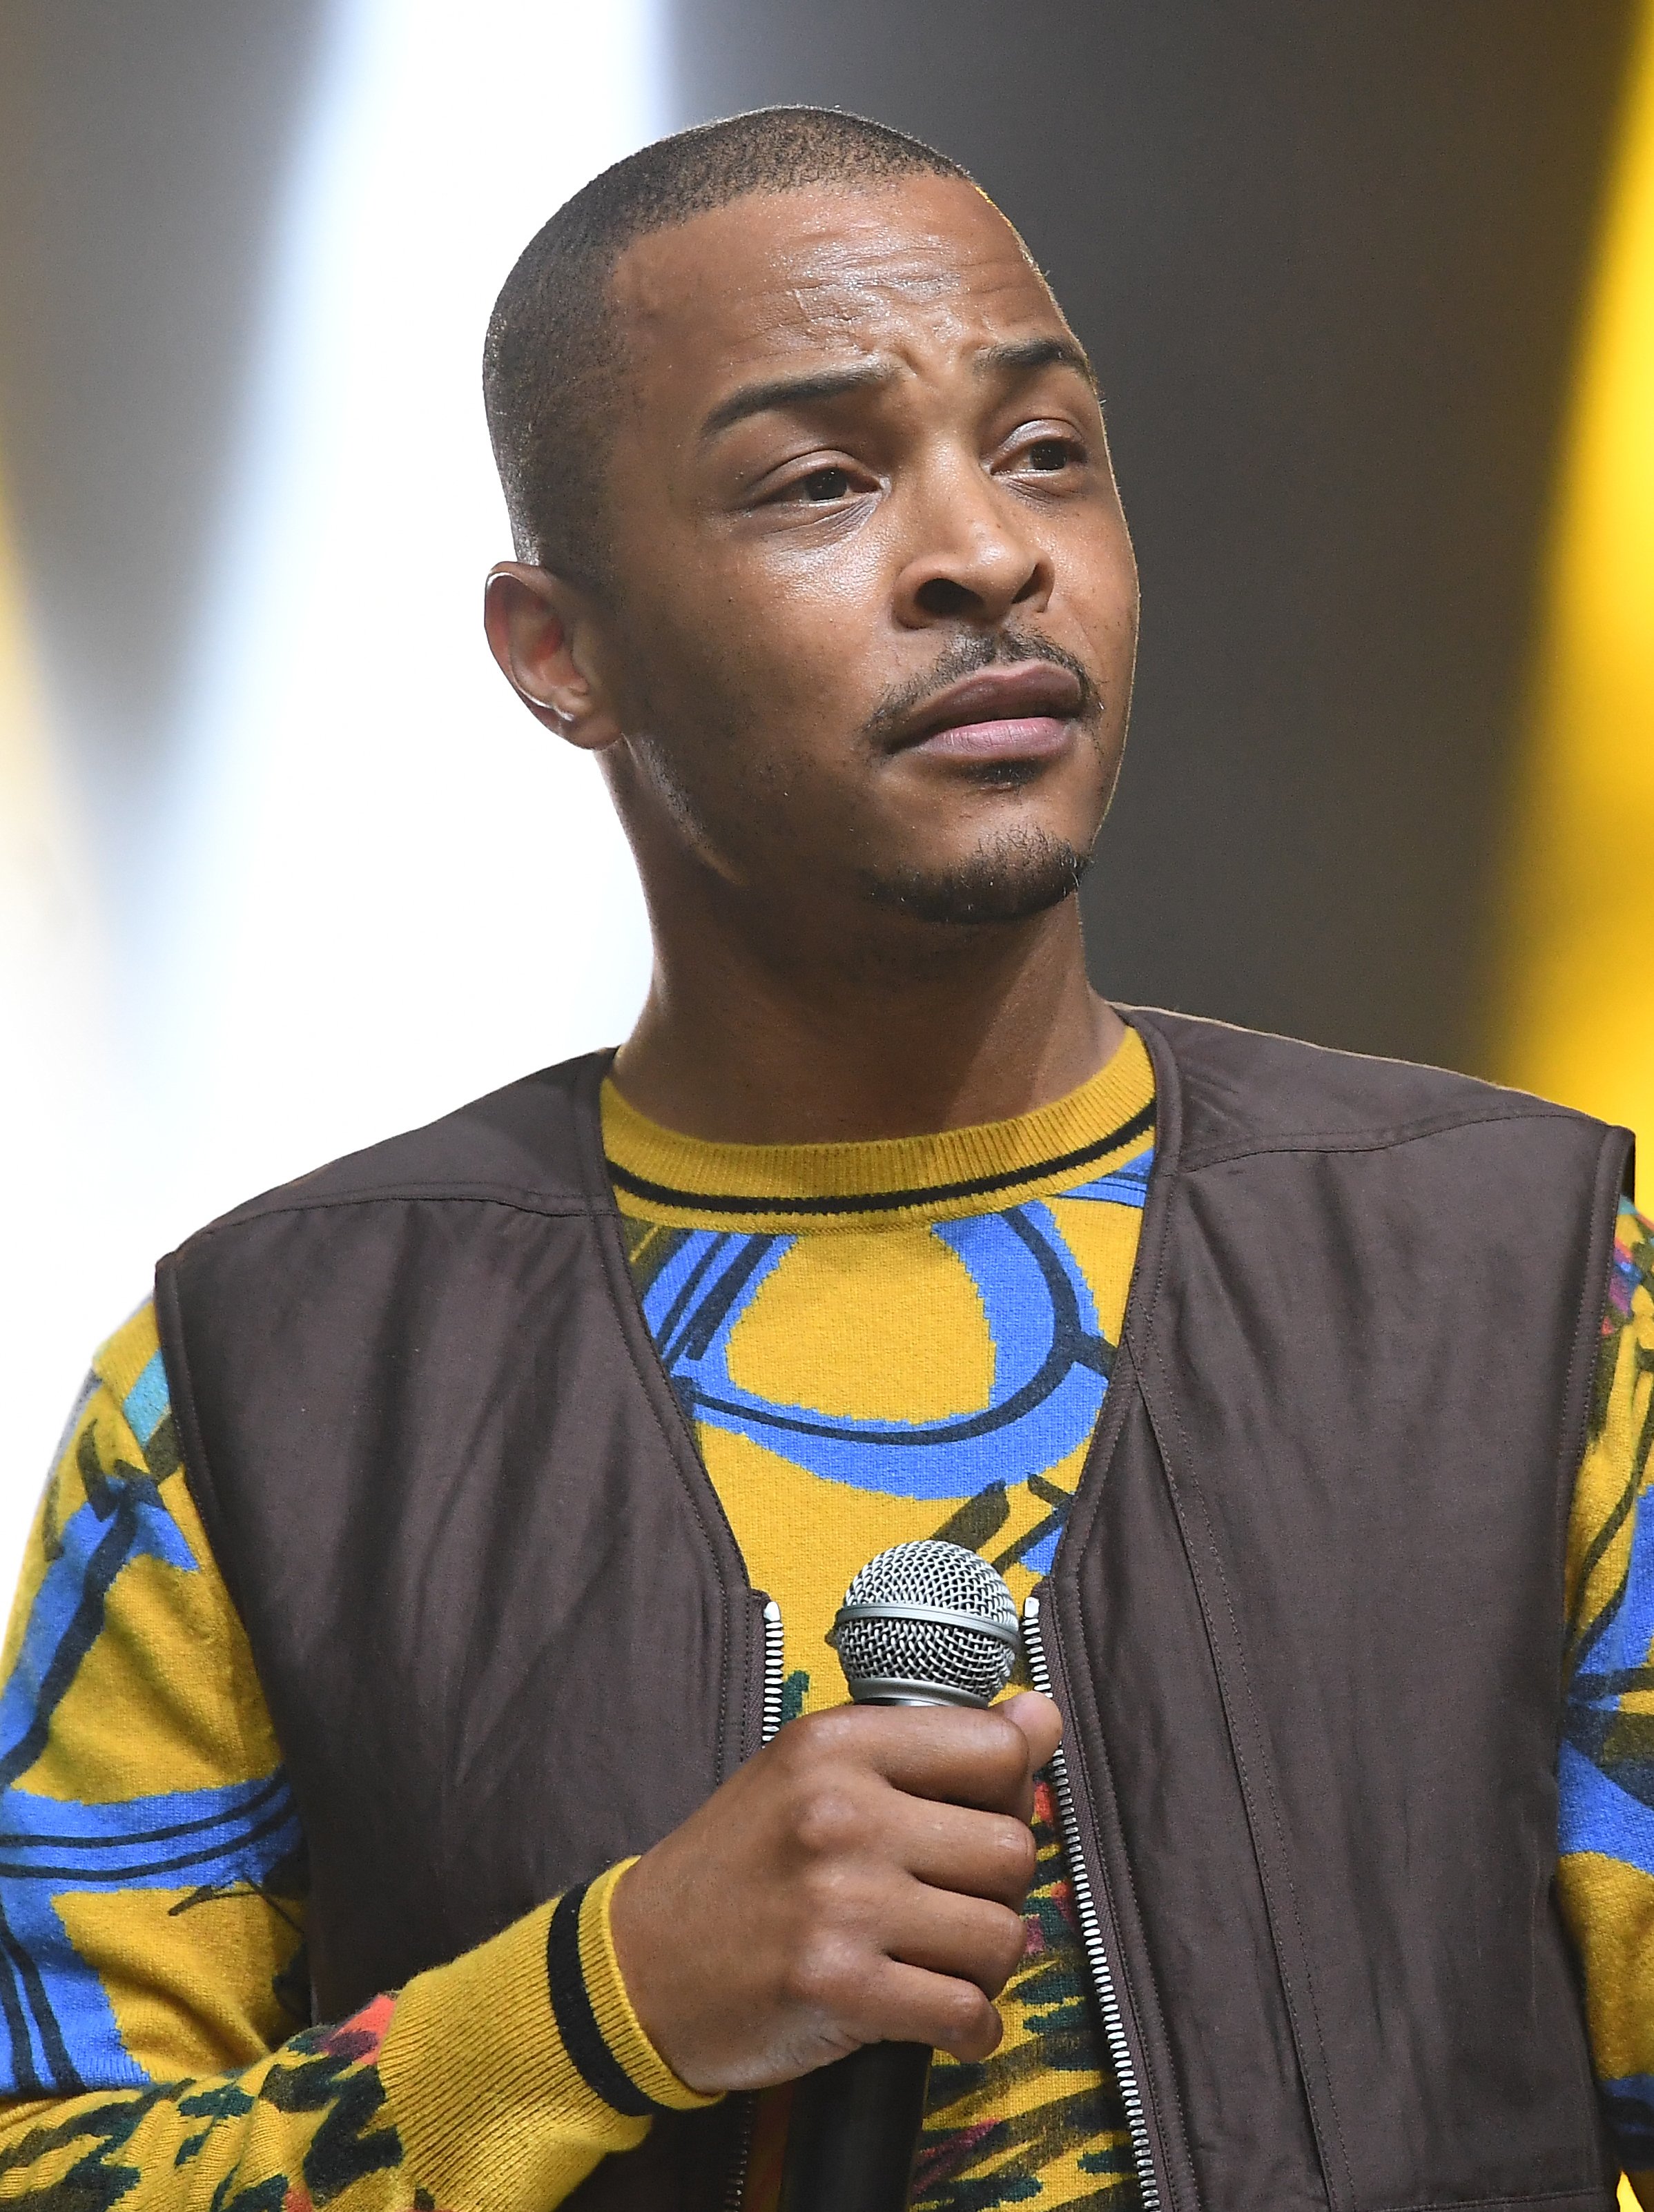 T.I. performs onstage during V-103 Car & Bike Show on July 14, 2018 in Atlanta, Georgia | Photo: Getty Images